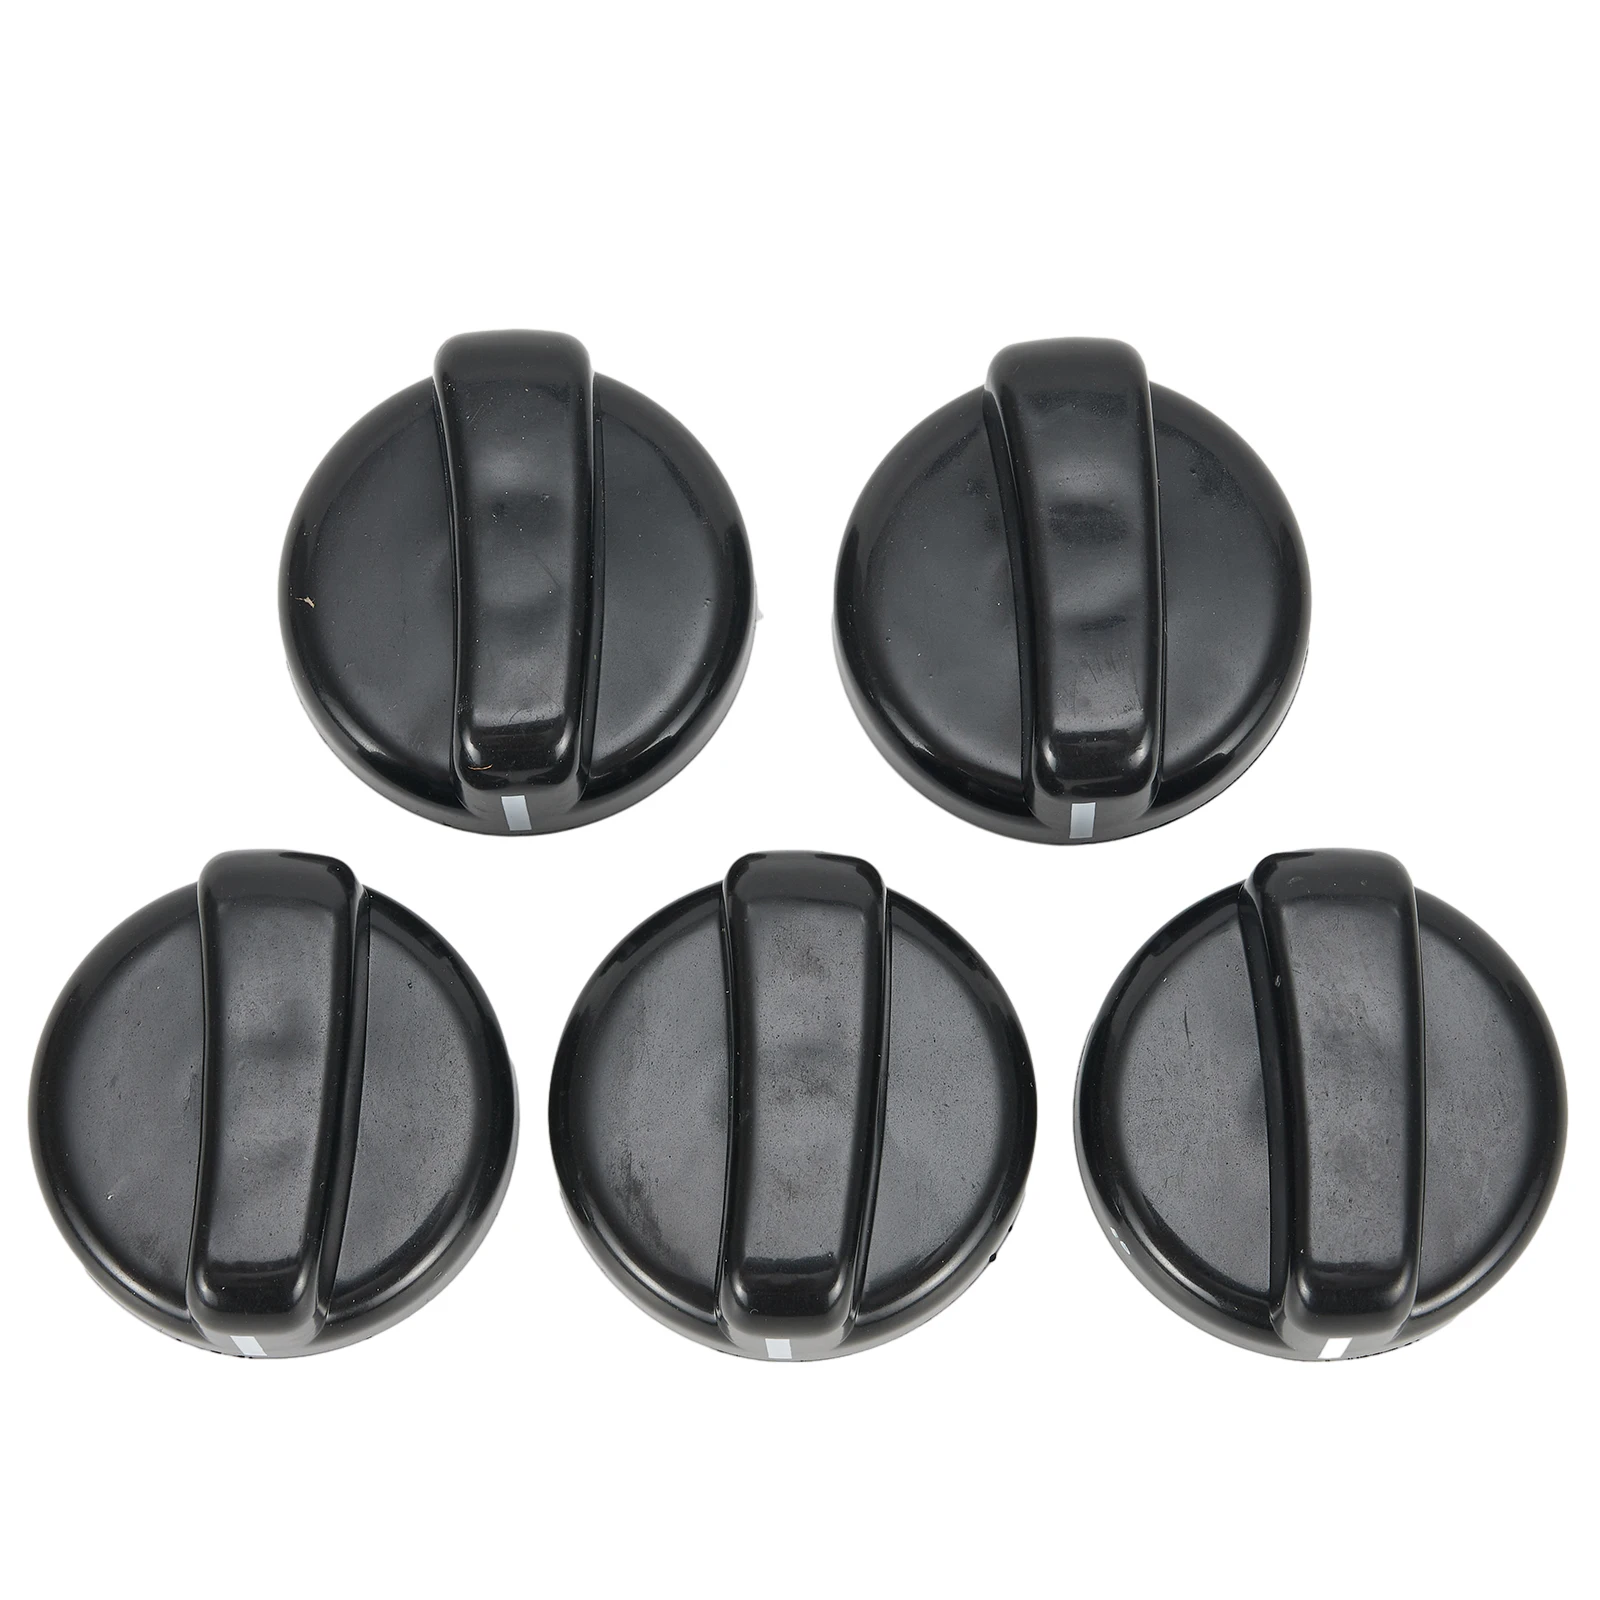 

5Pcs 8mm General Replacement Switch Knob Gas Stove Control Knob Oven Cooker Hob Black Knob For Benchtop Burner Kitchen Accessory